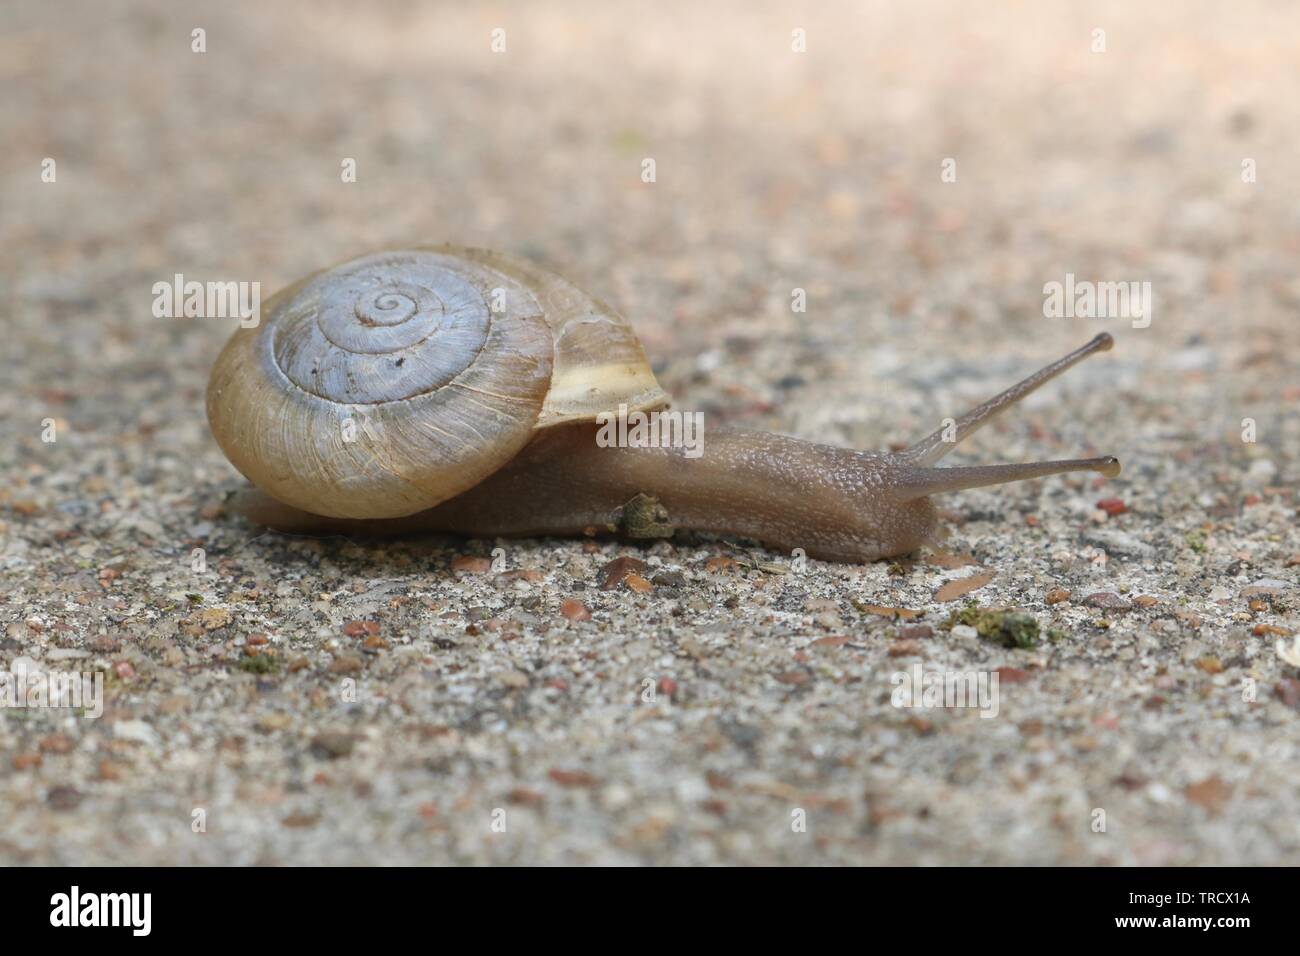 Closeup of a flat coil snail moving along Stock Photo